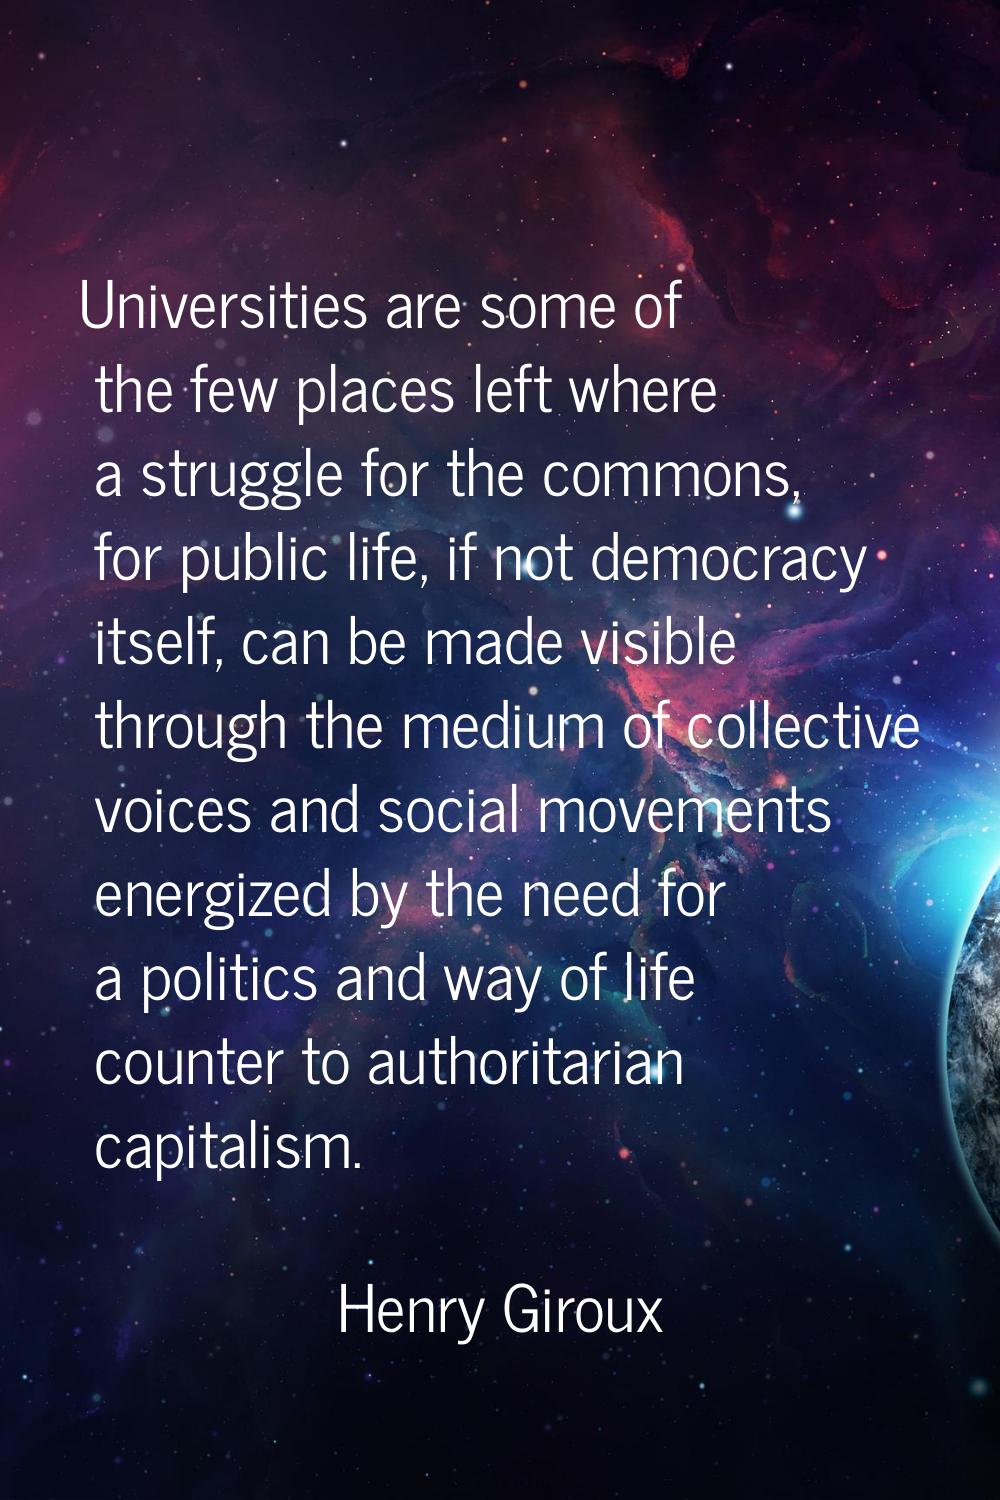 Universities are some of the few places left where a struggle for the commons, for public life, if 